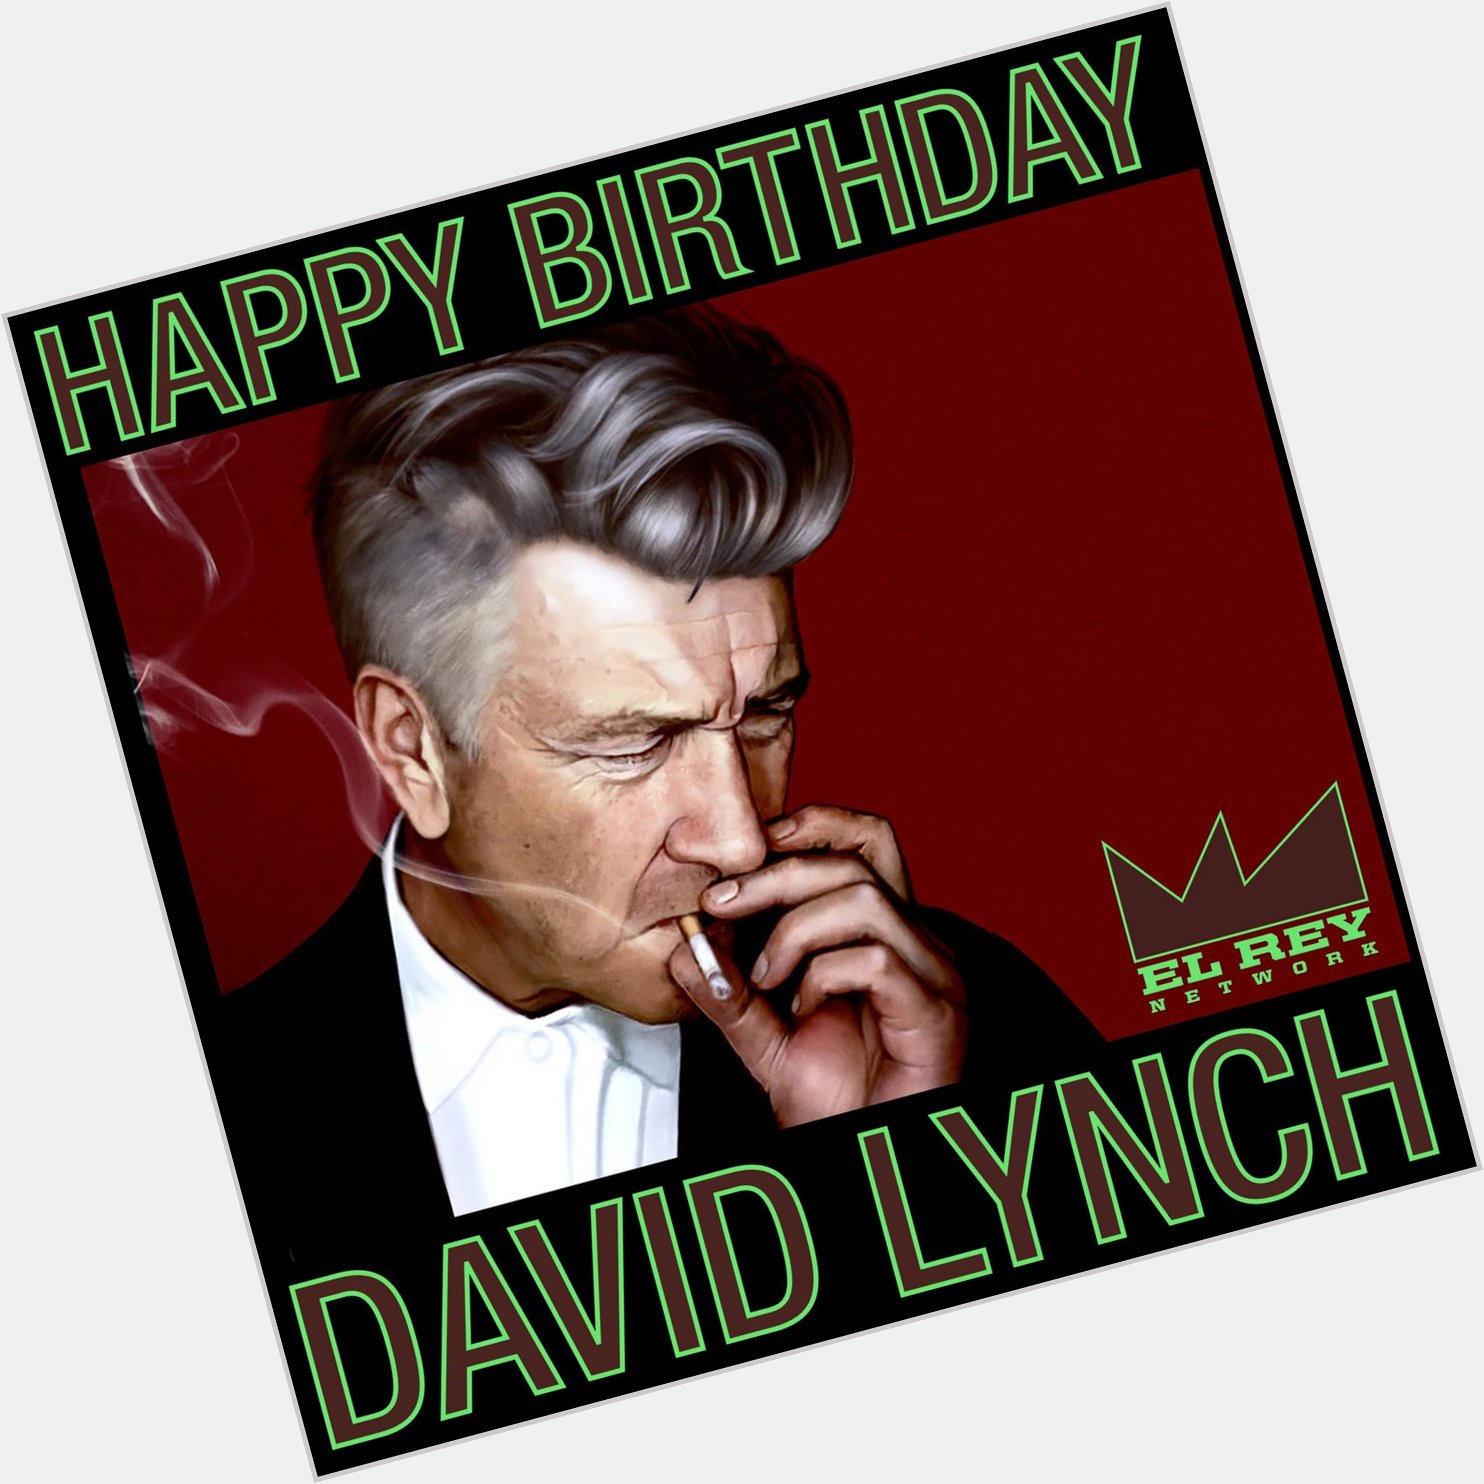 . wishes a Happy Birthday to one of the most unique visionaries in movie history - David Lynch. 